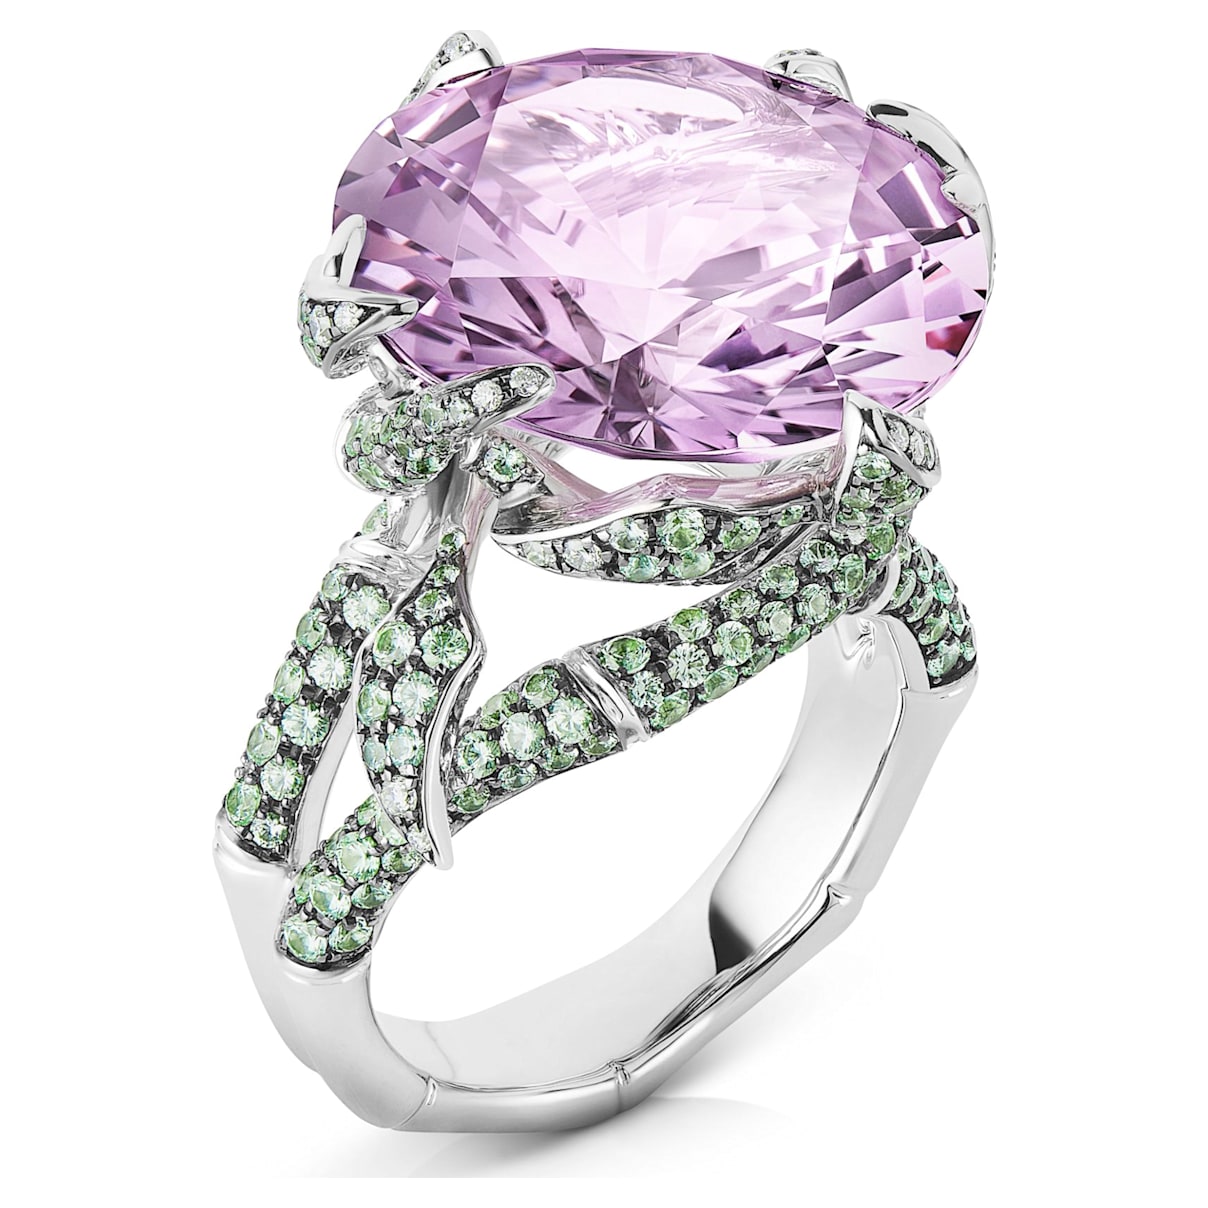 Bamboo Shoots Cocktail Ring, Pink & Green Created Sapphires, 18K White Gold, Size 55